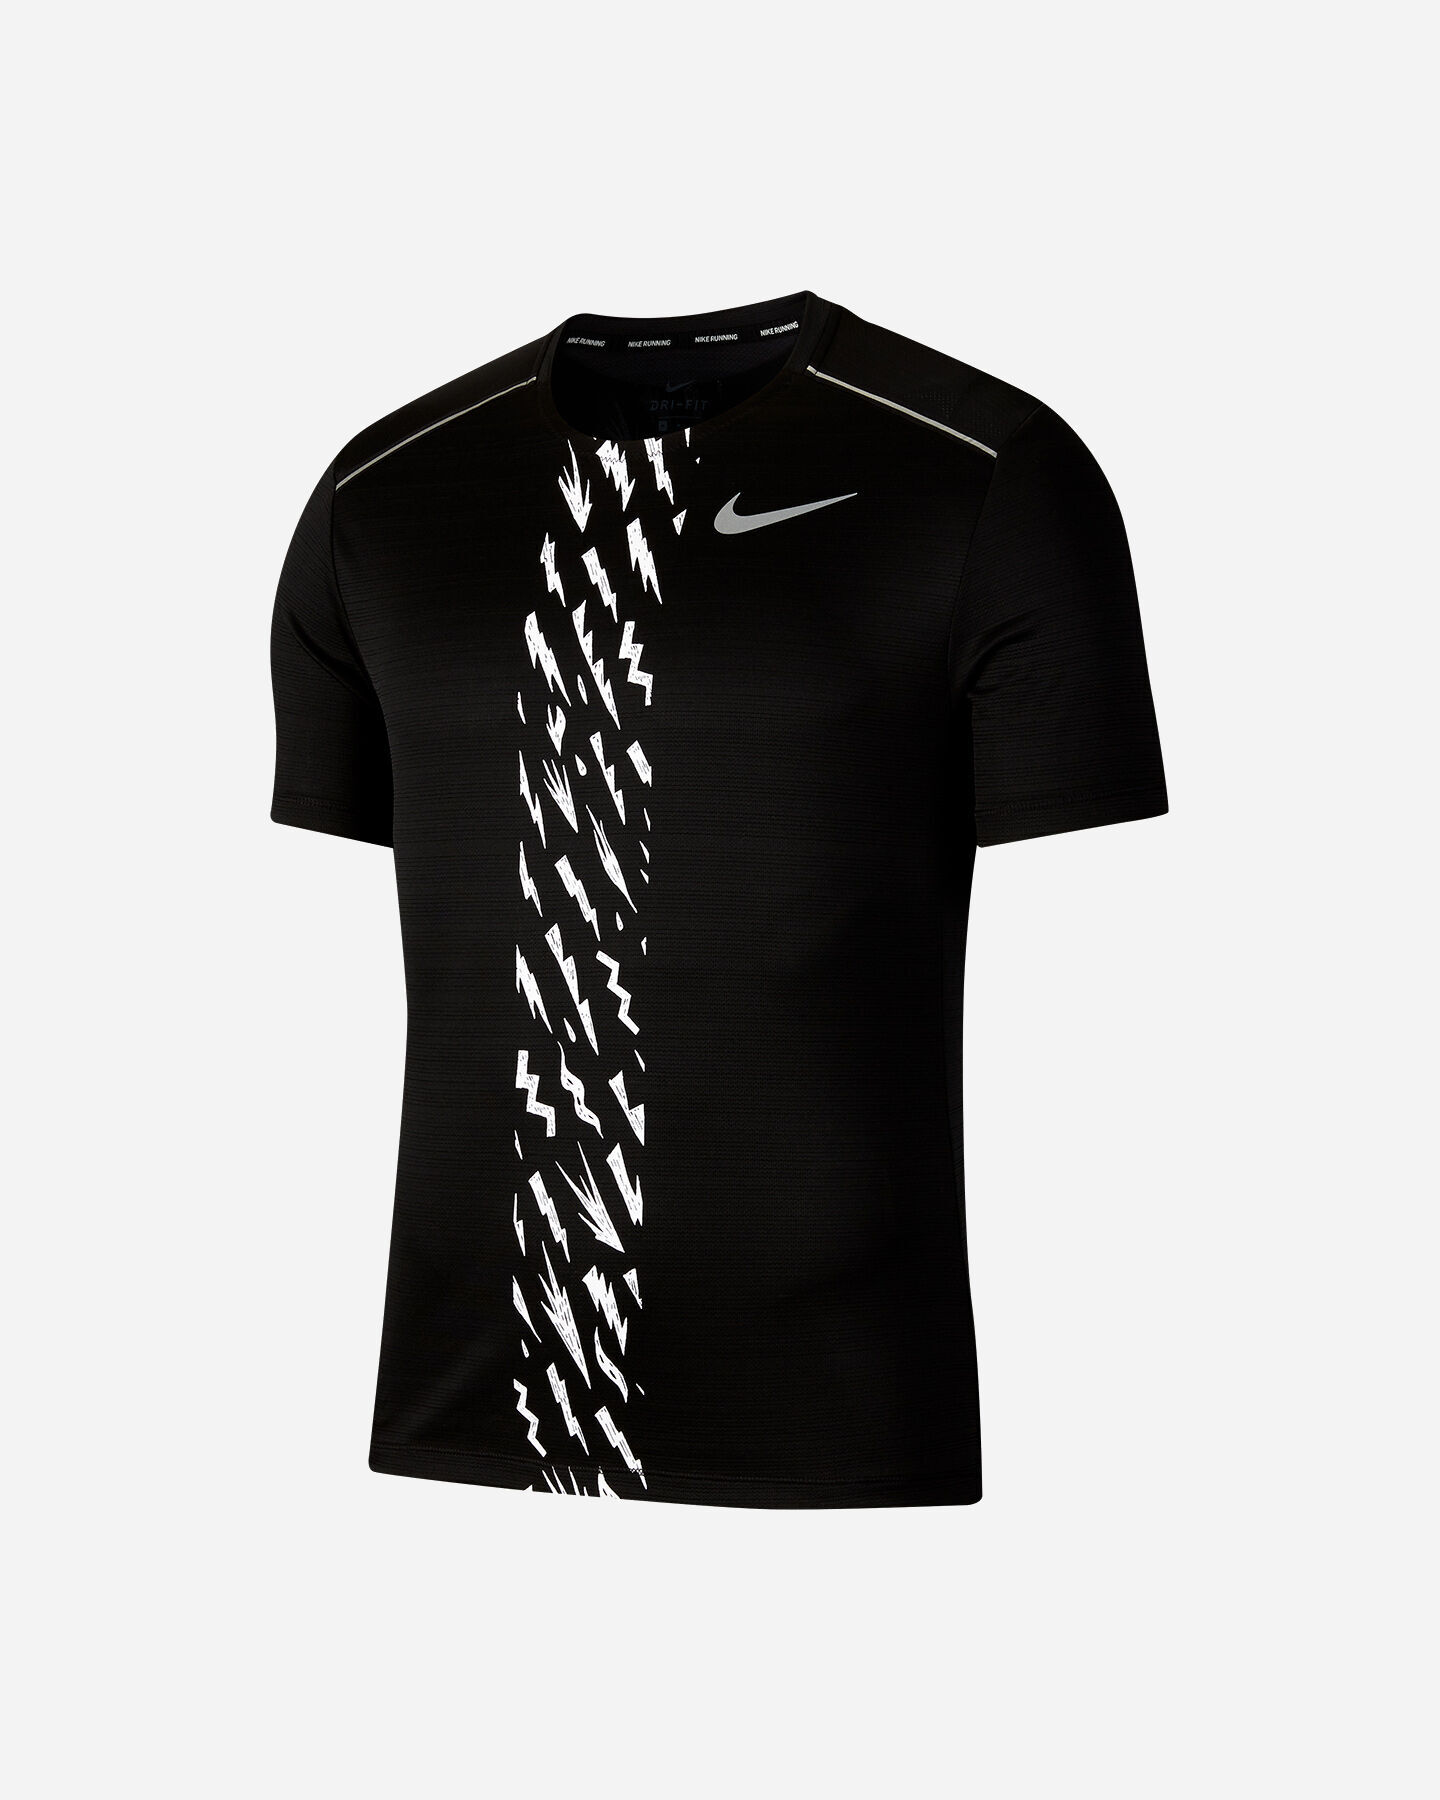  T-Shirt running NIKE DRI-FIT MILER M S5164391|010|S scatto 0